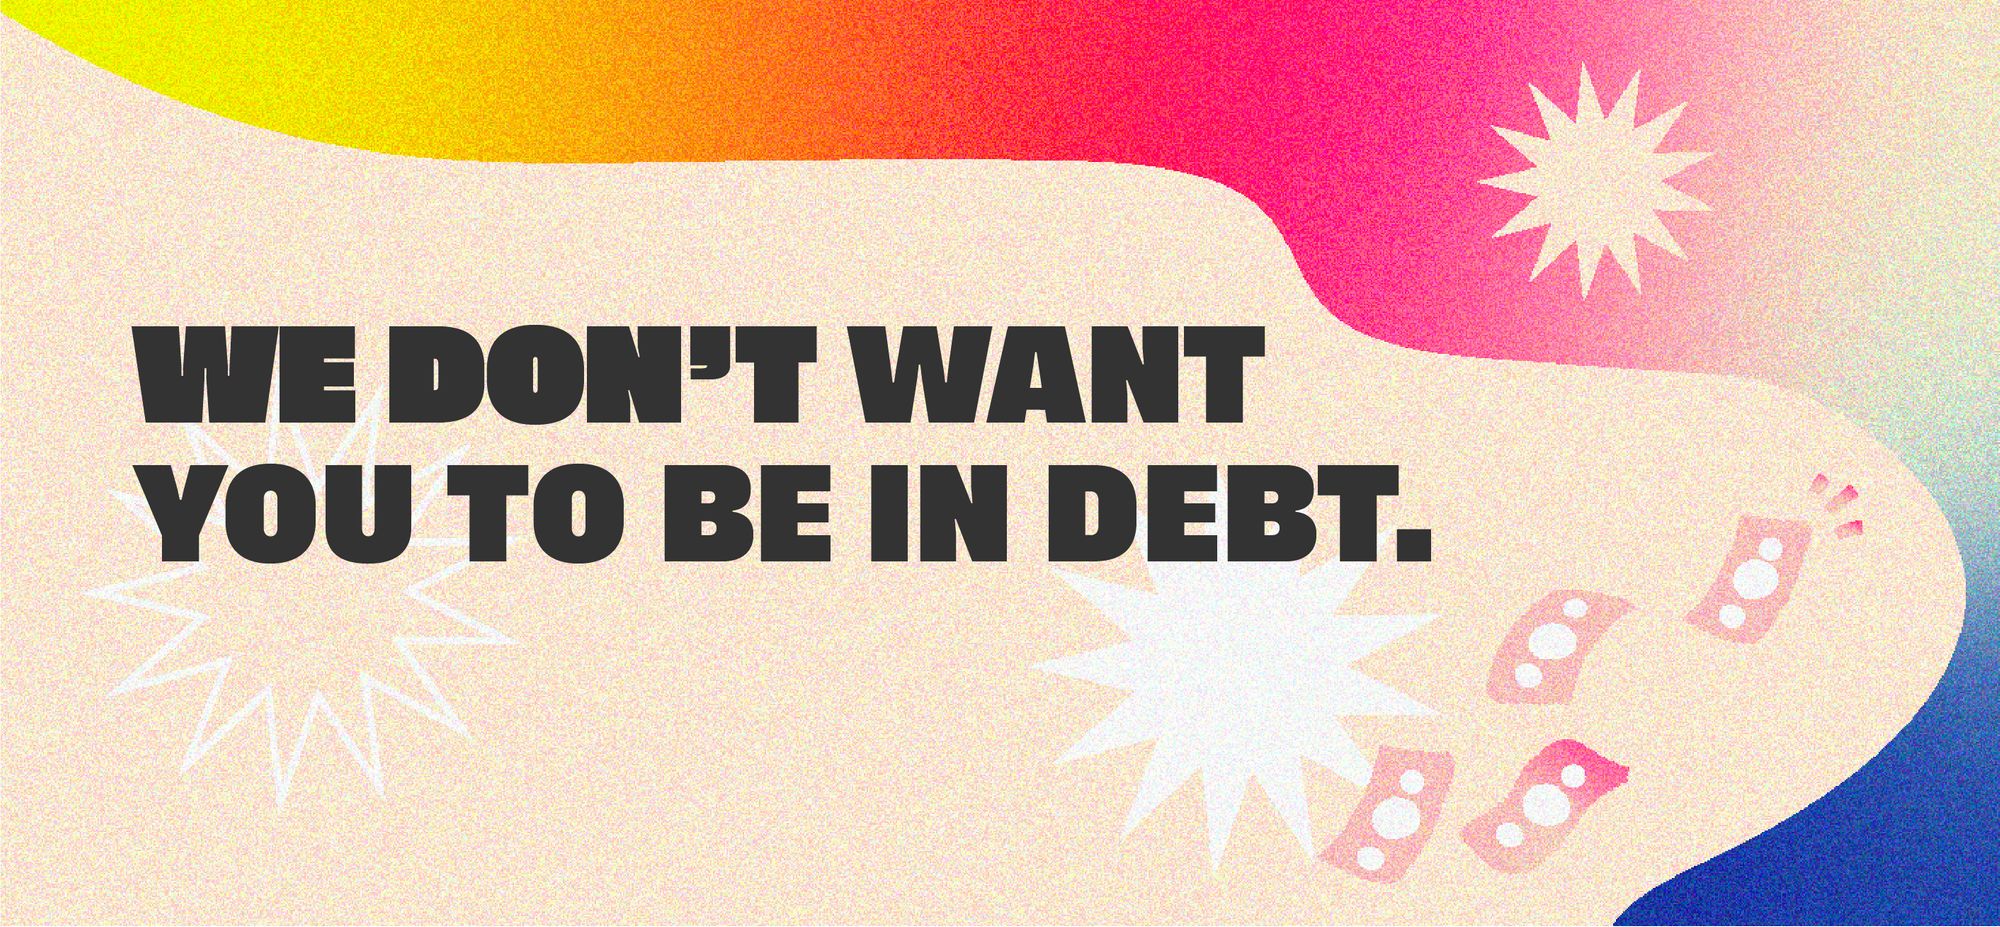 We don’t want you to be in debt